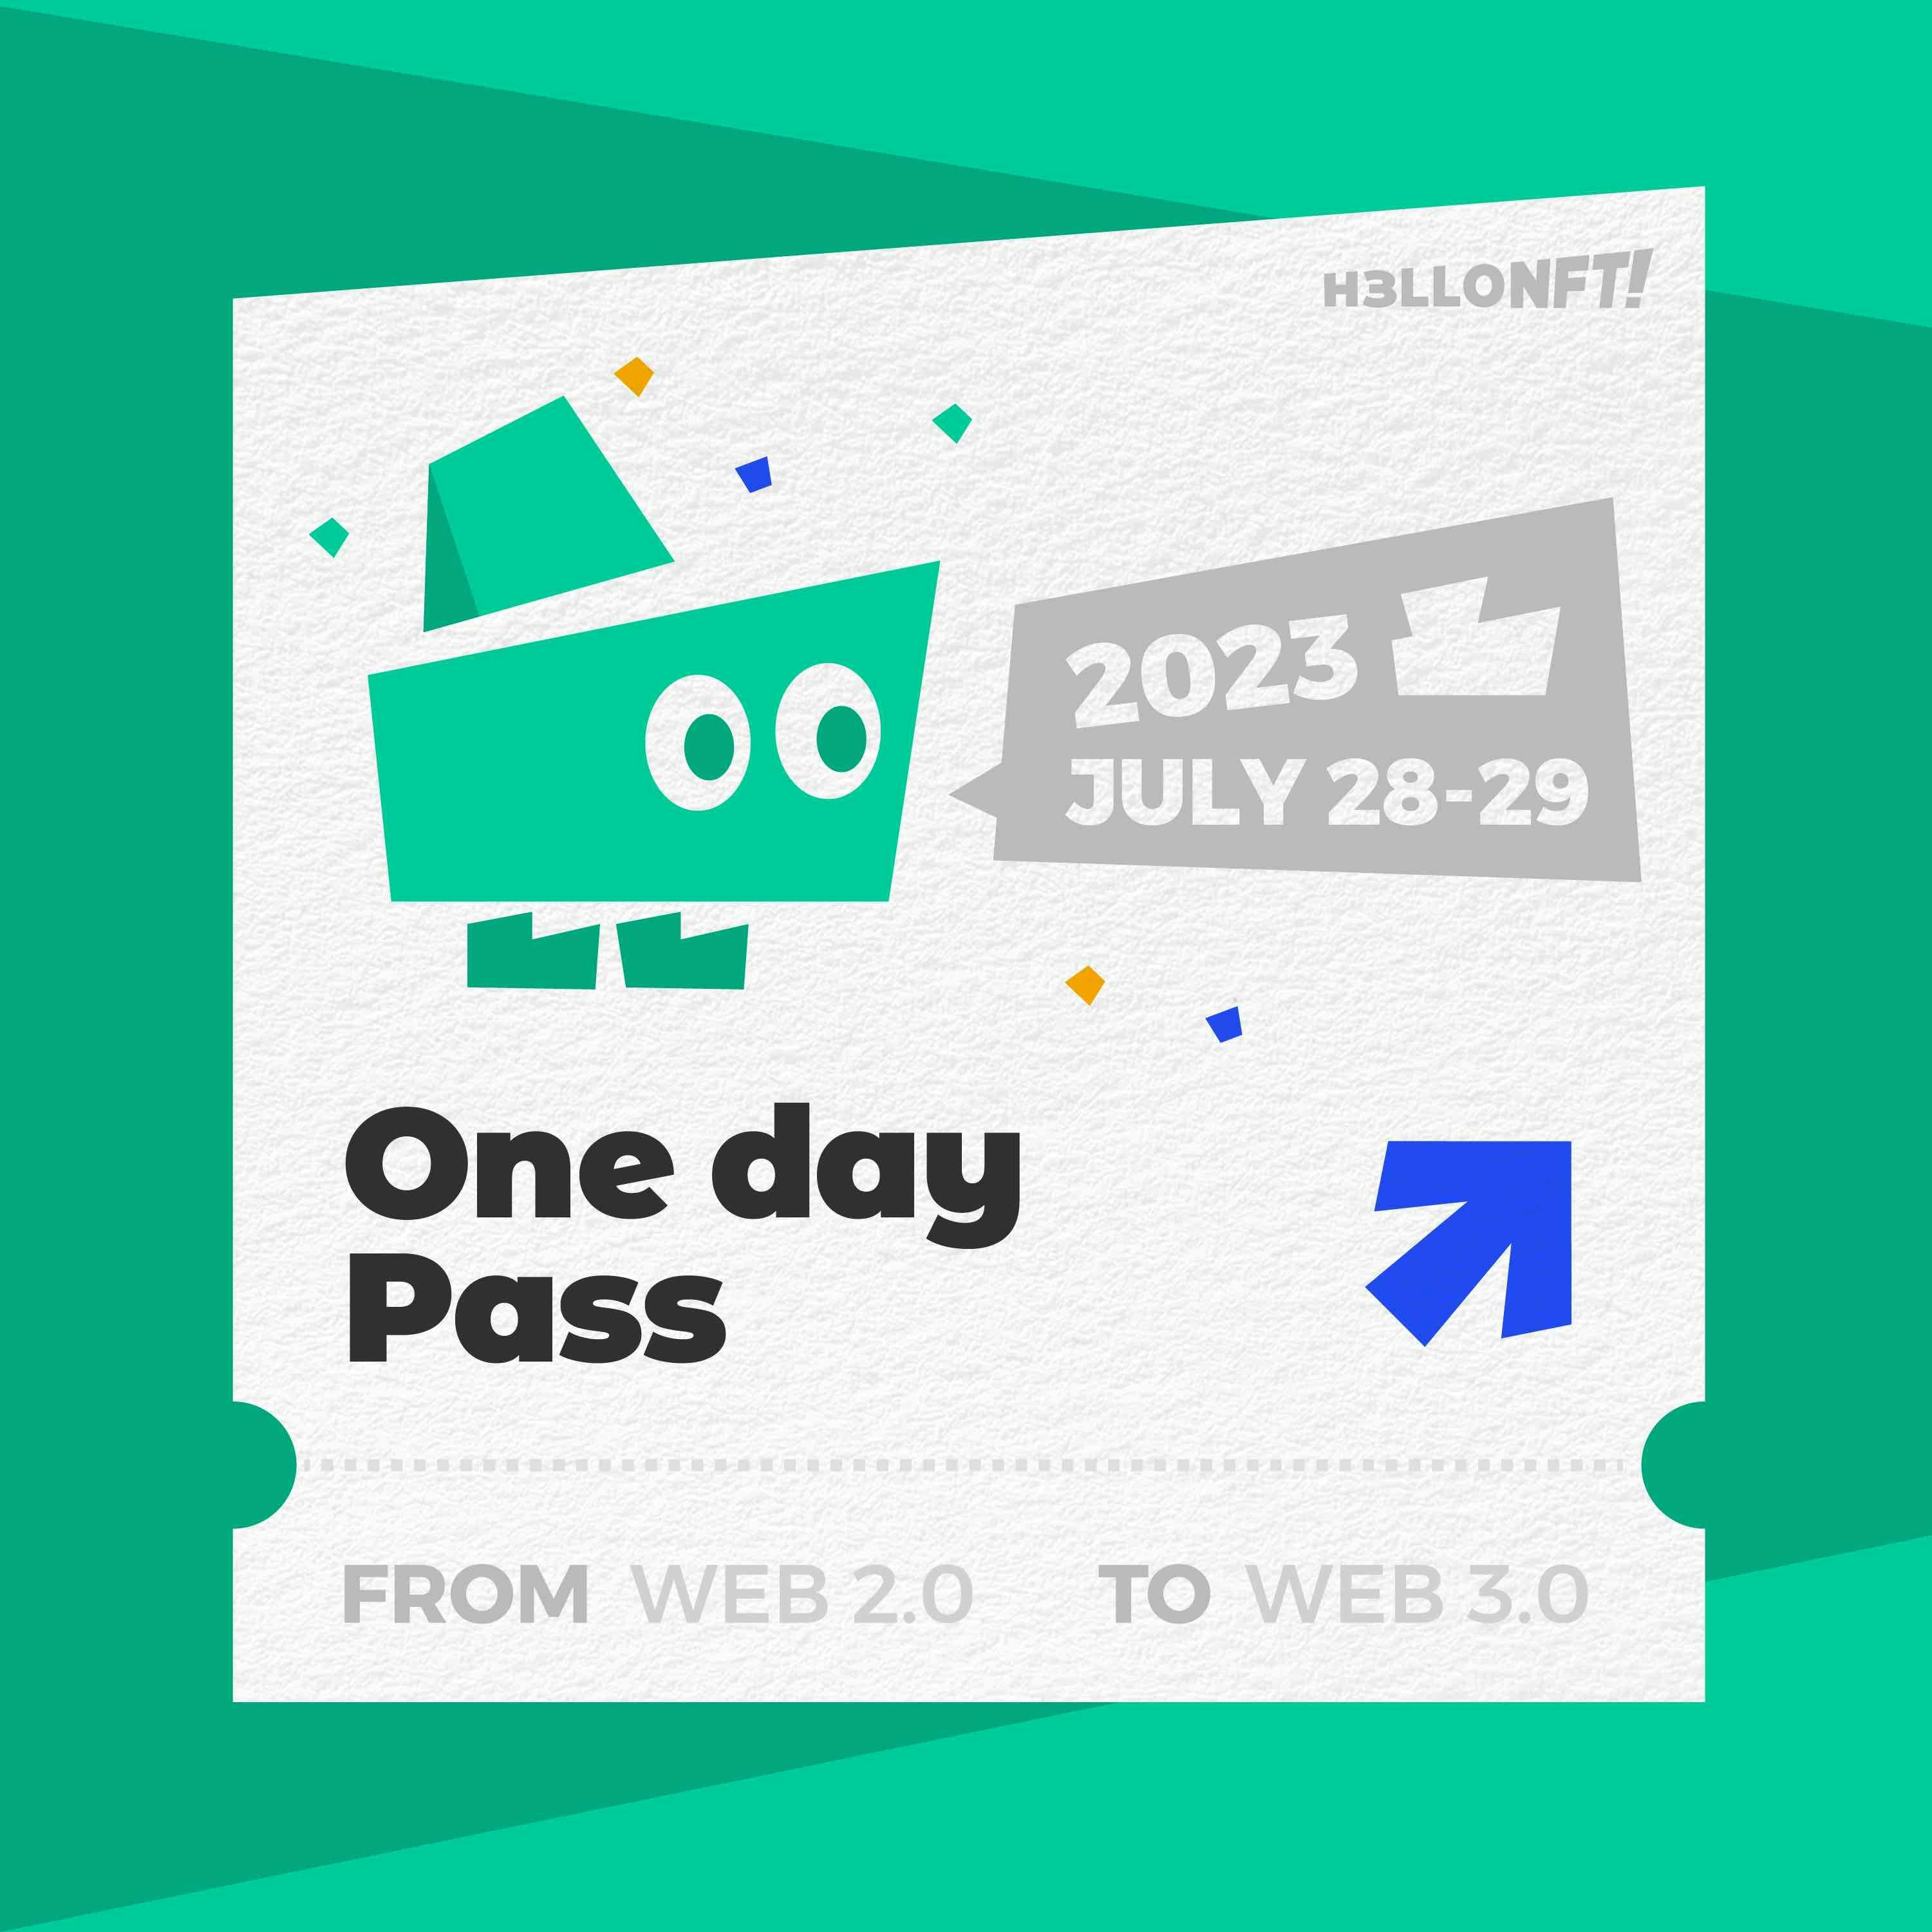 One Day Pass (HELLO NFT 2023)